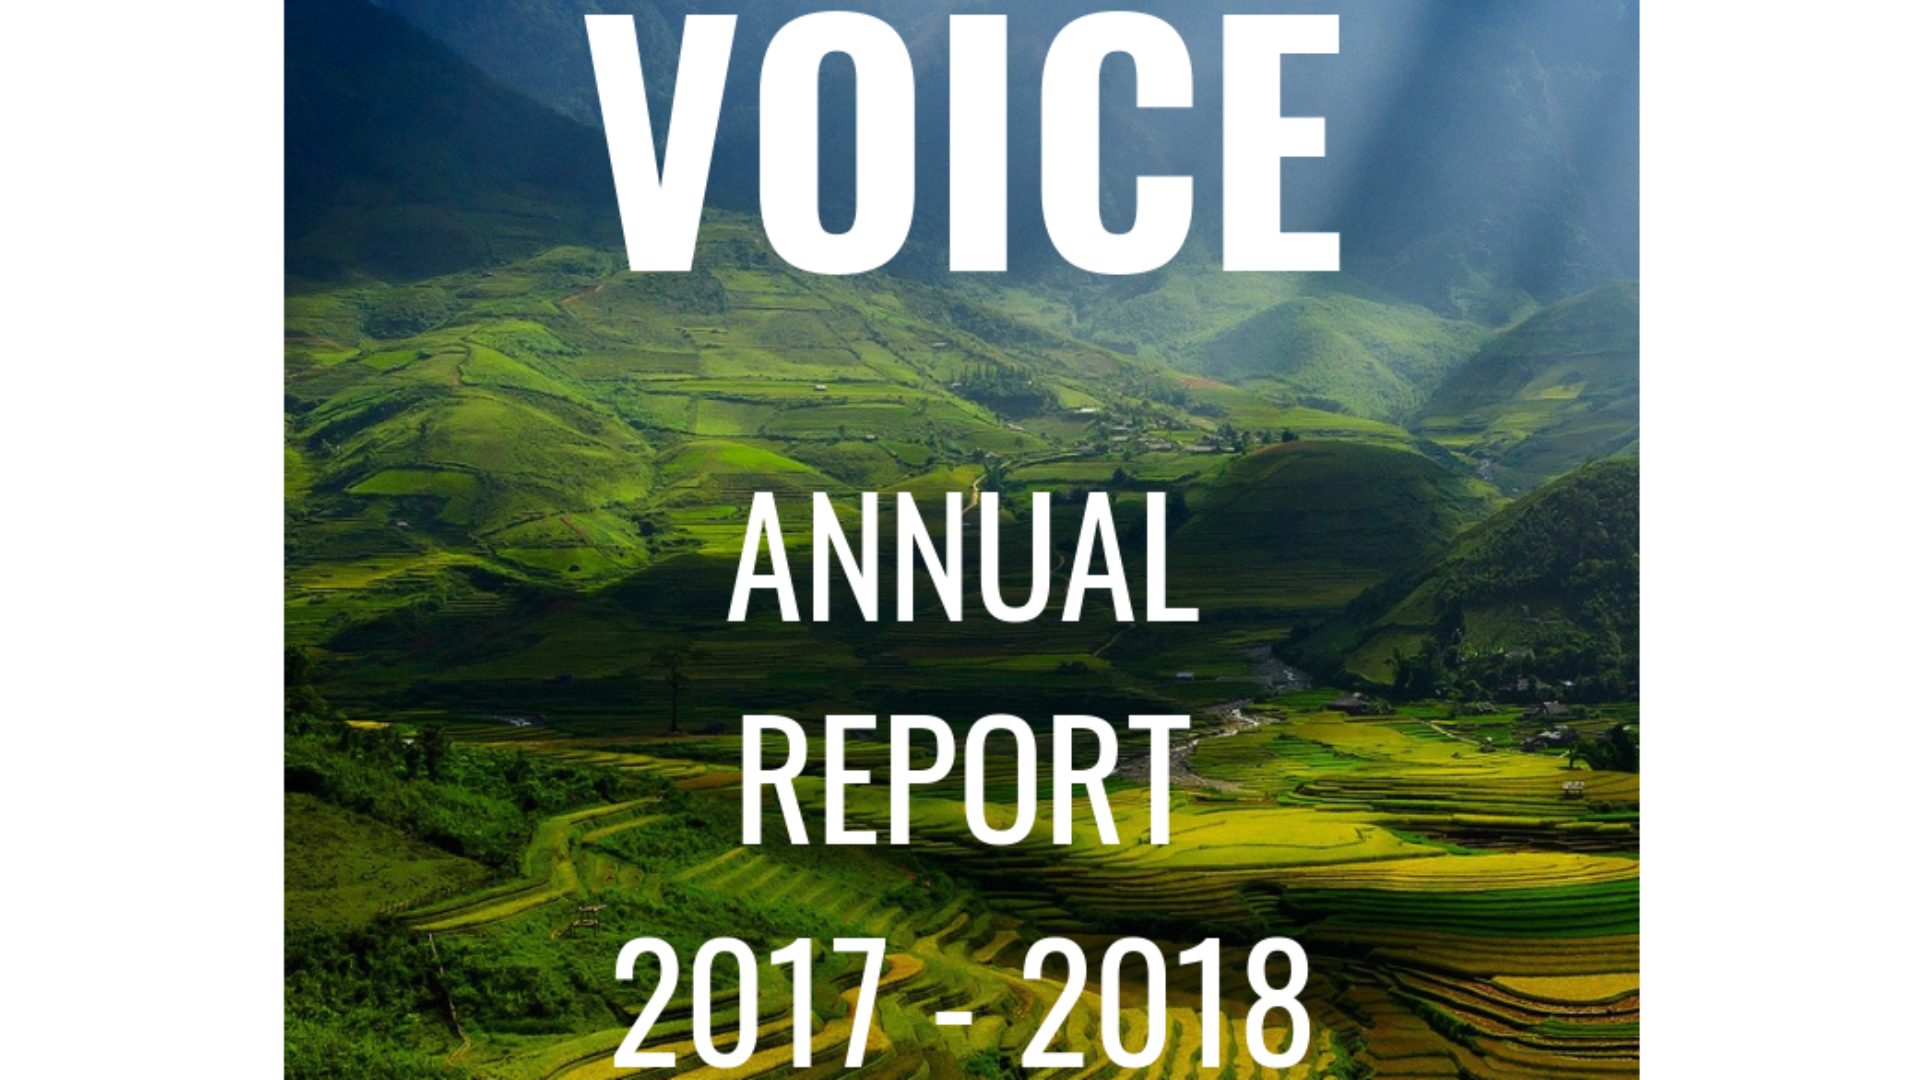 What did VOICE accomplish in 2017 and 2018?